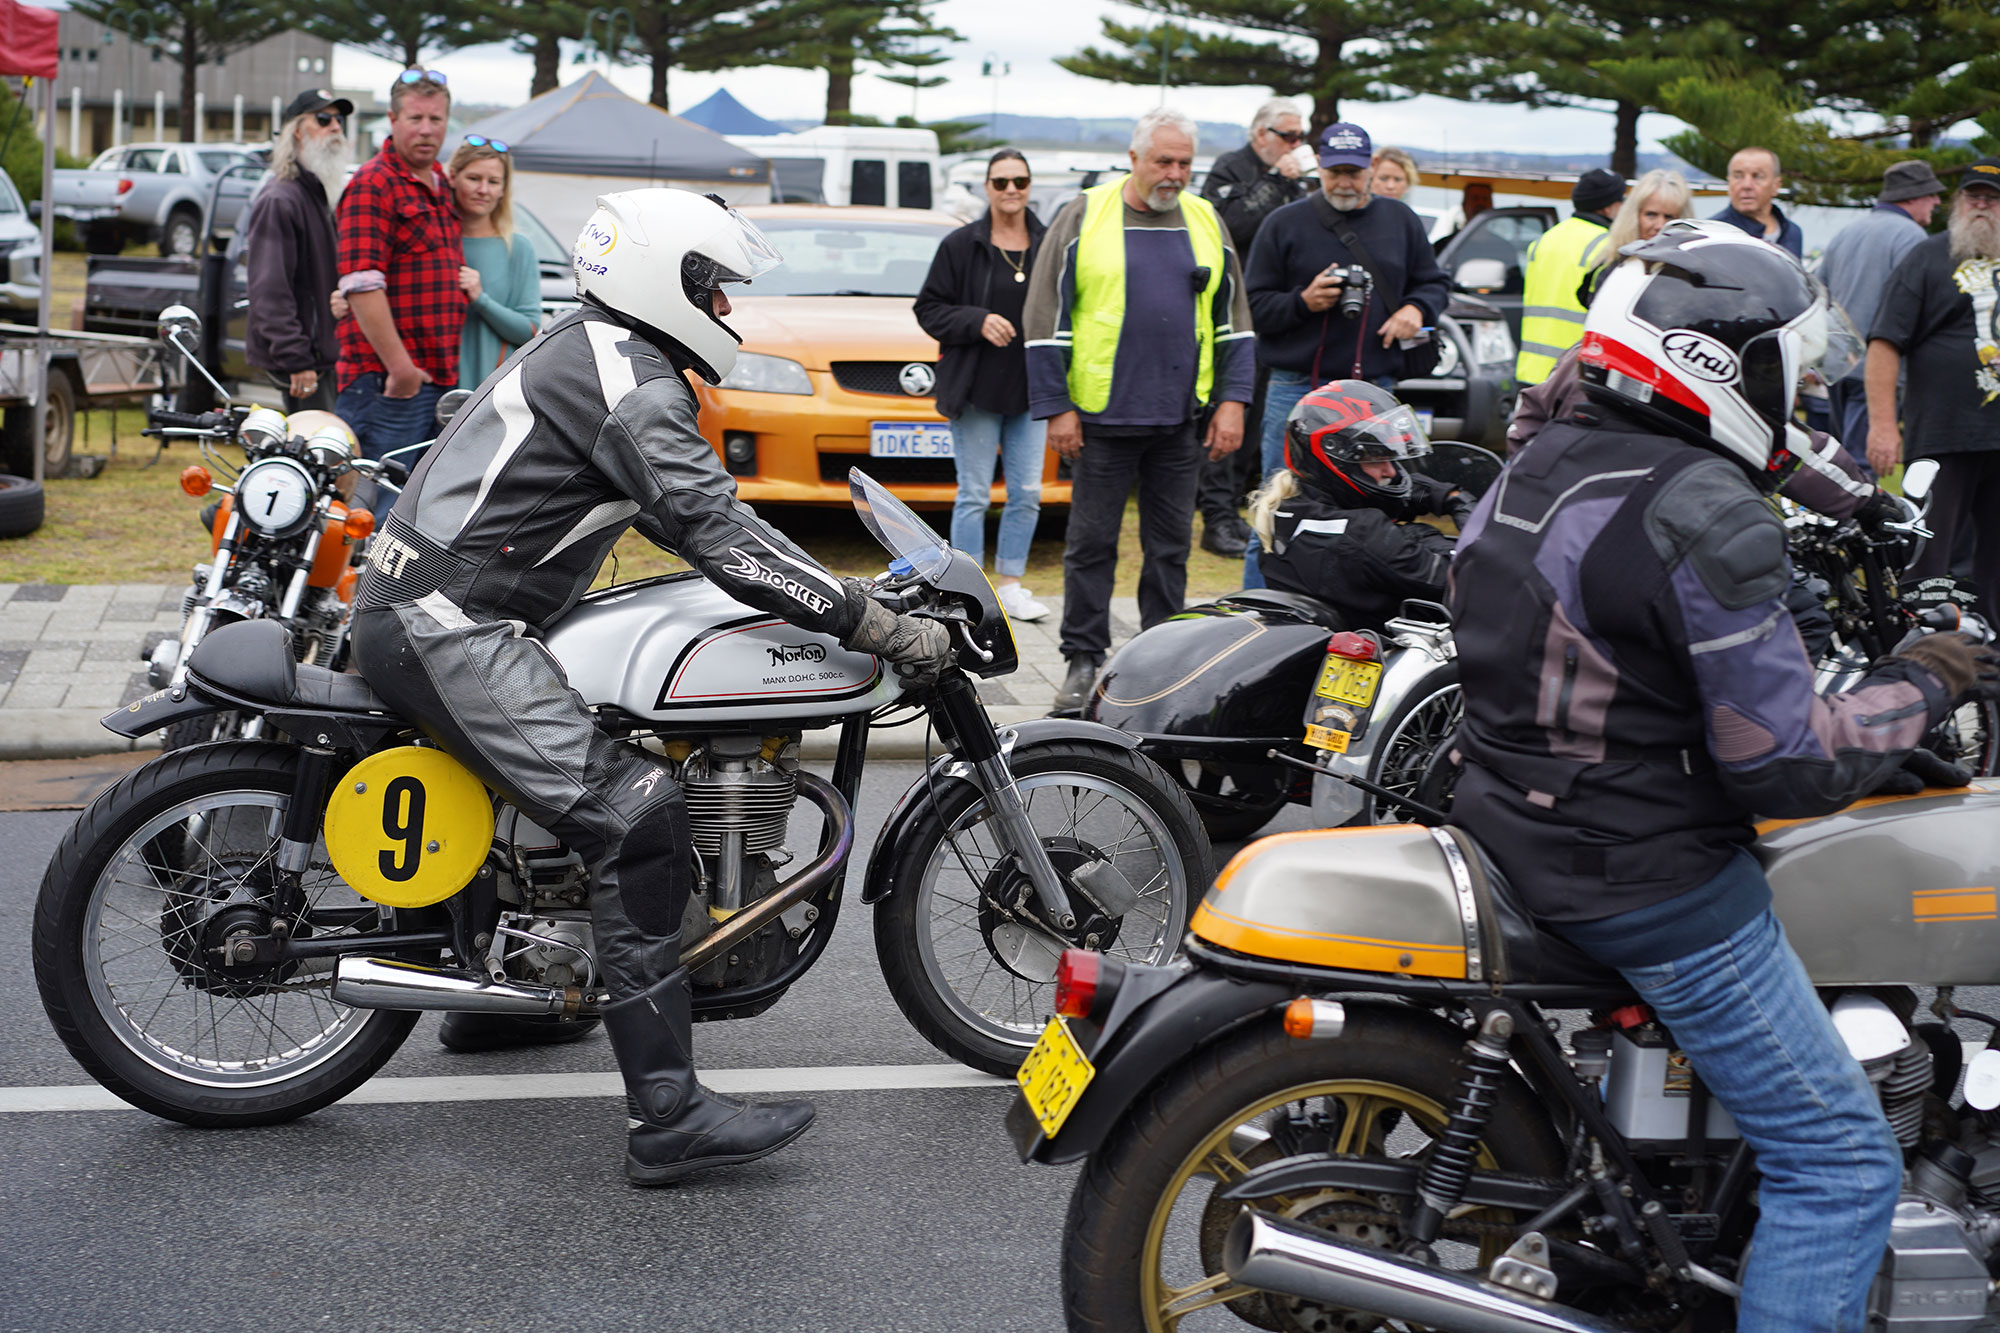 Bill on his Manx at the start line.